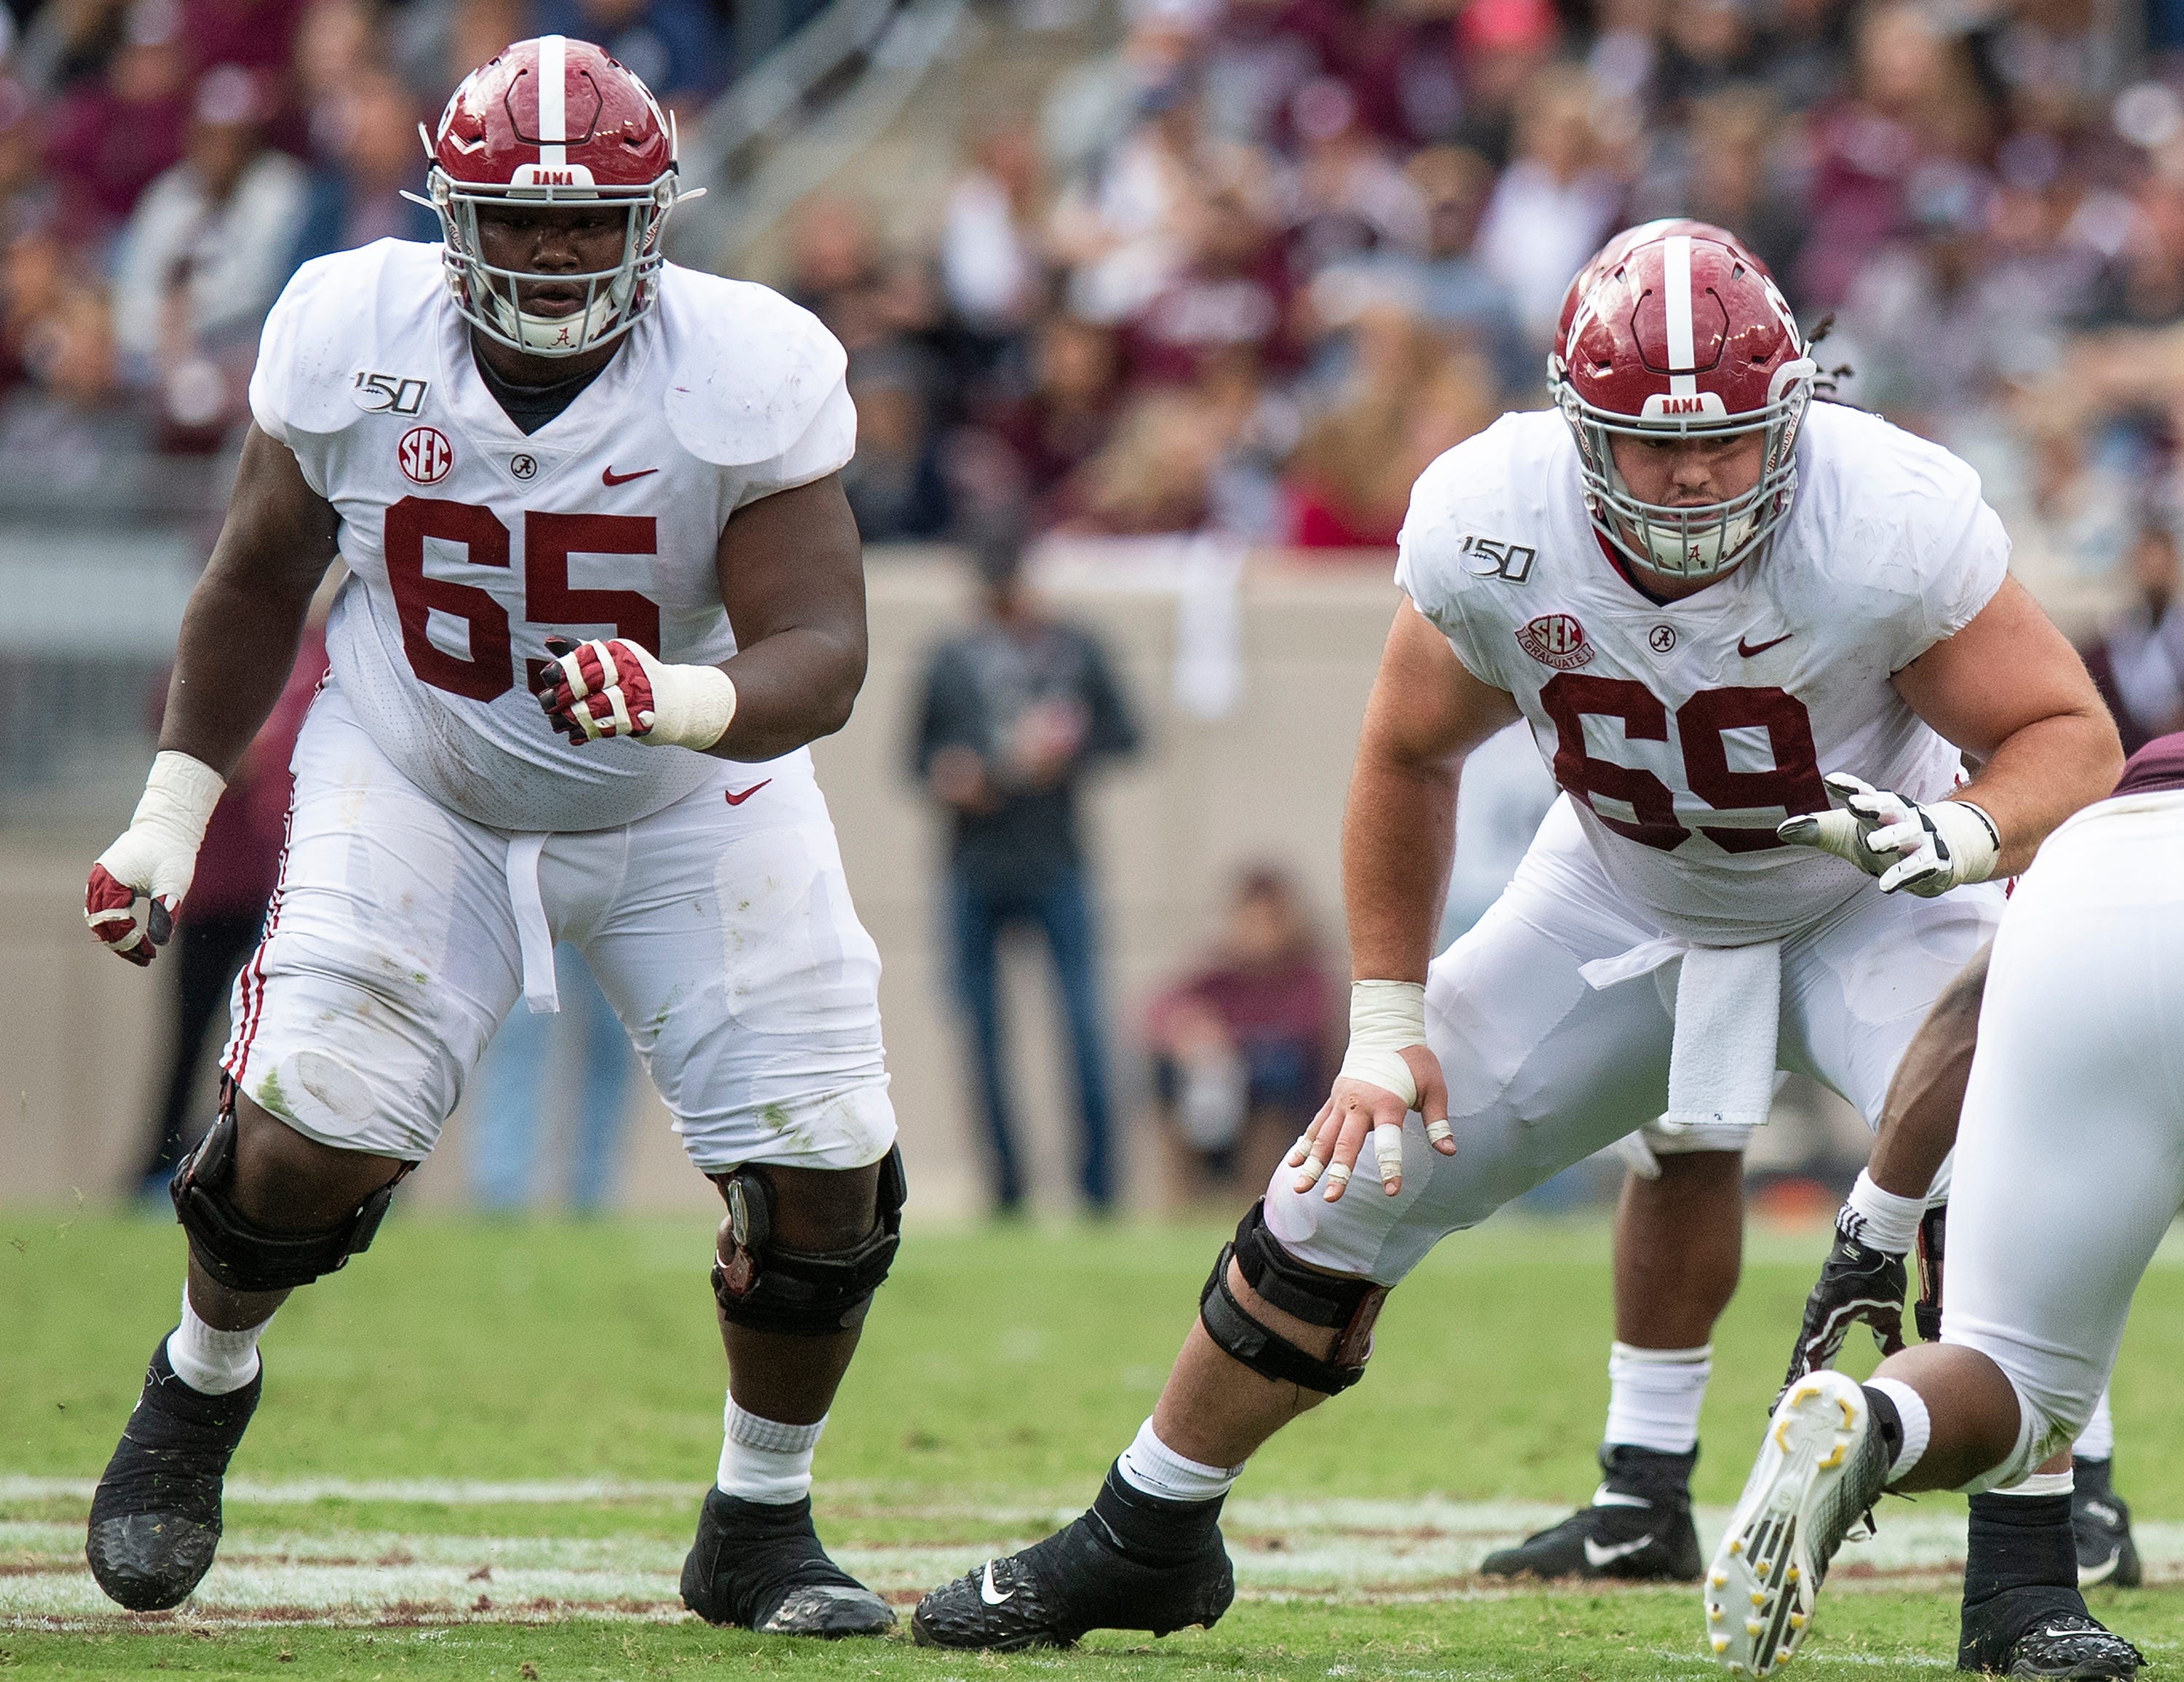 Alabama offensive linemen Deonte Brown (65) and Landon Dickerson (69) touchdown at Kyle Field in College Station, Texas on Saturday October 12, 2019.